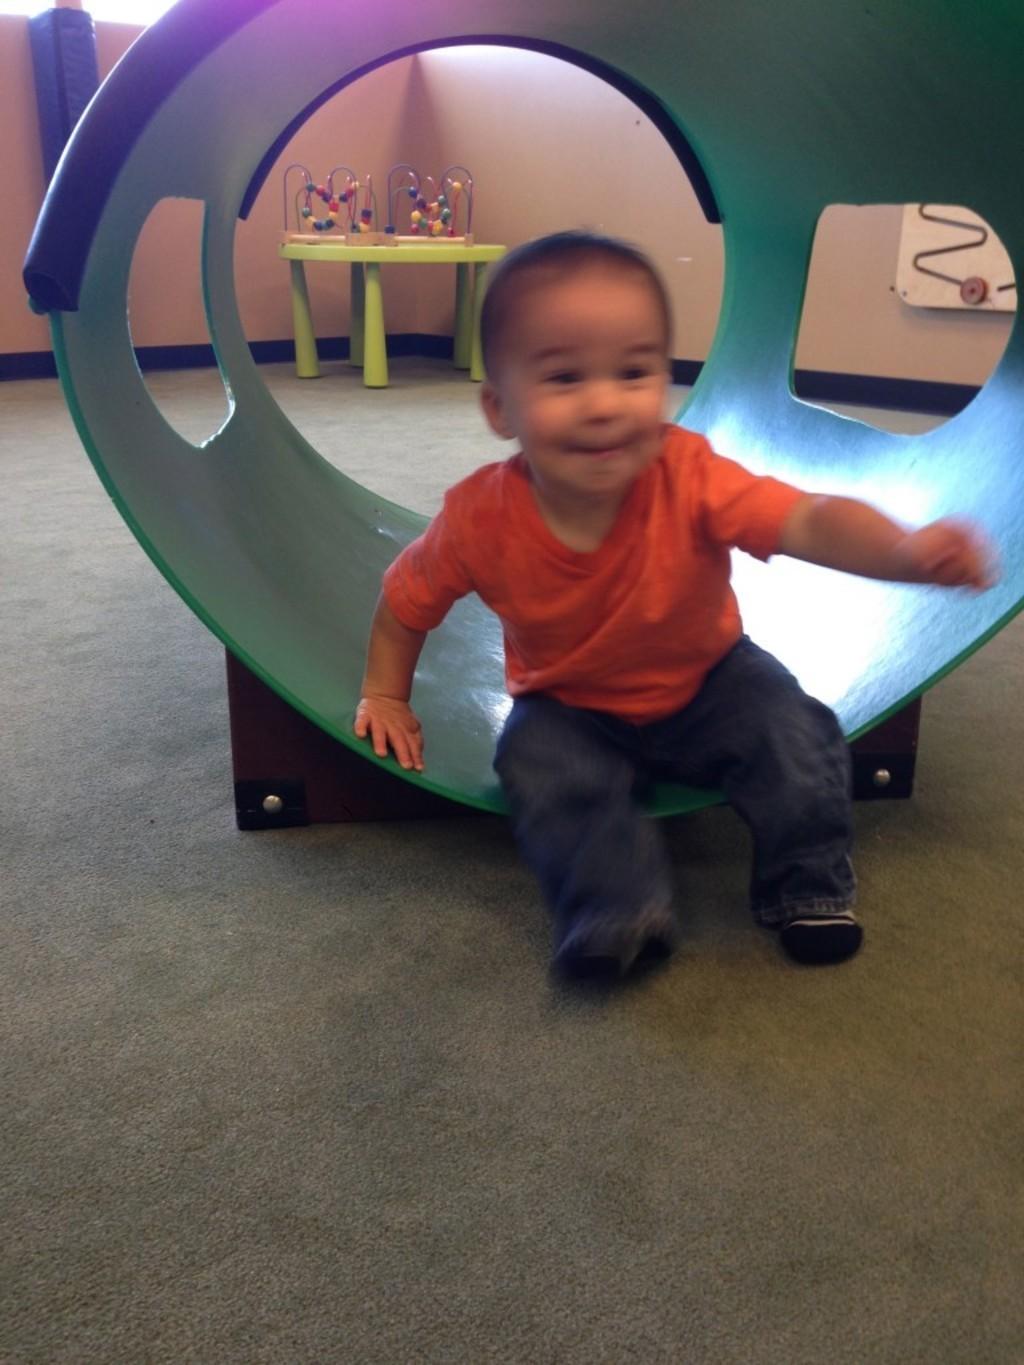 All I have is blurry pictures.  He moves fast.